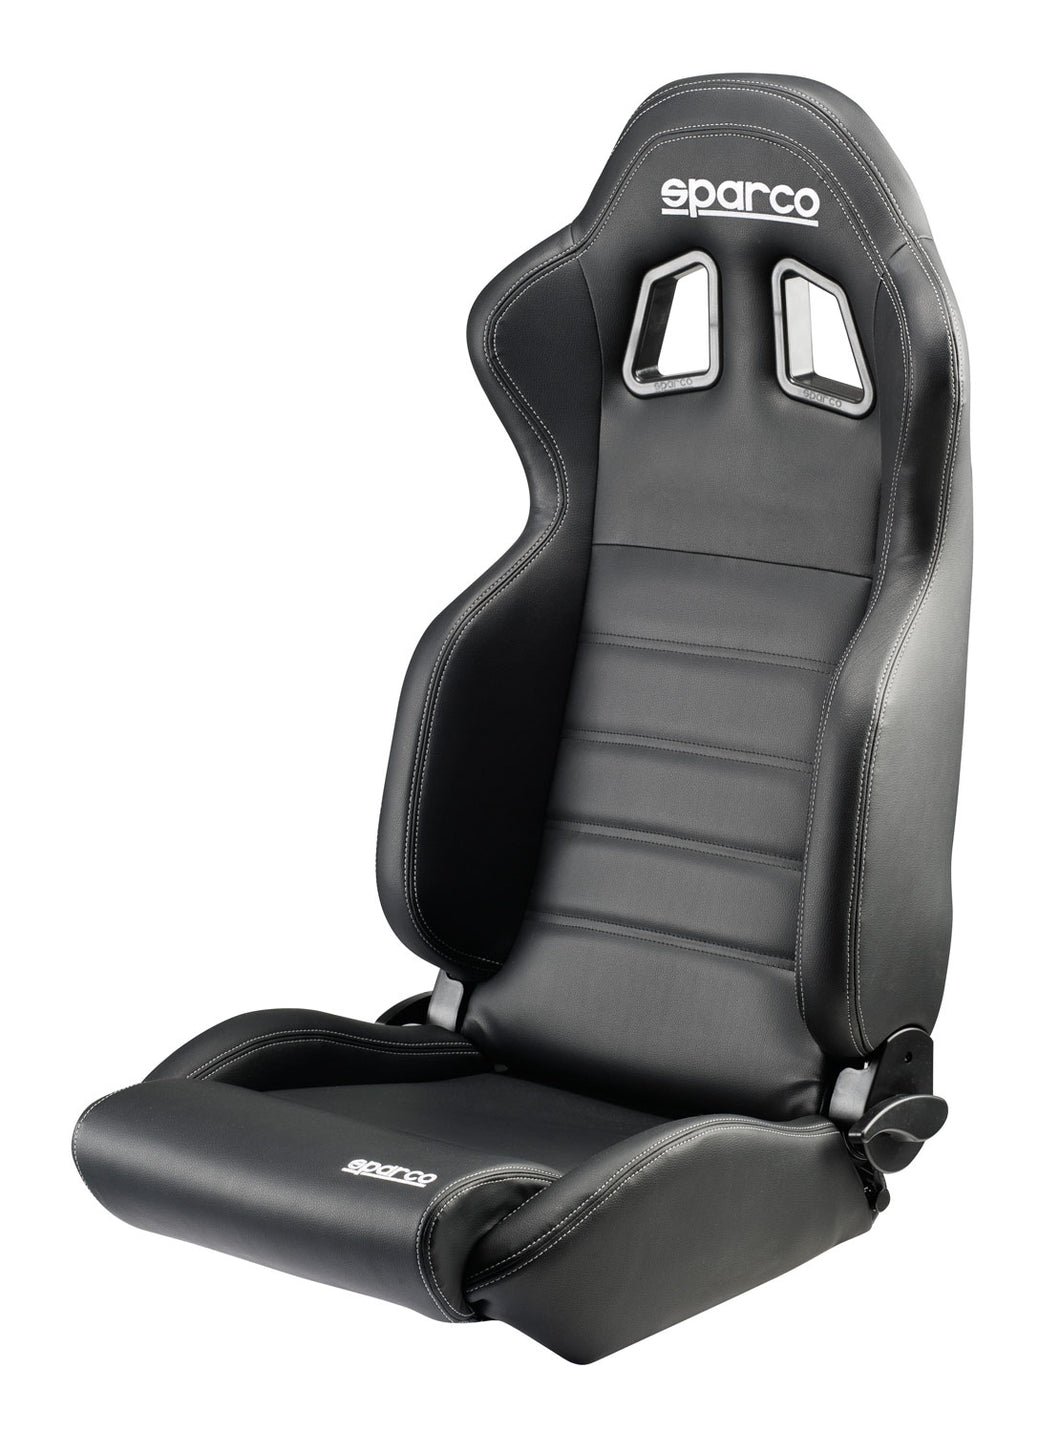 Sparco sports seat R100 leather